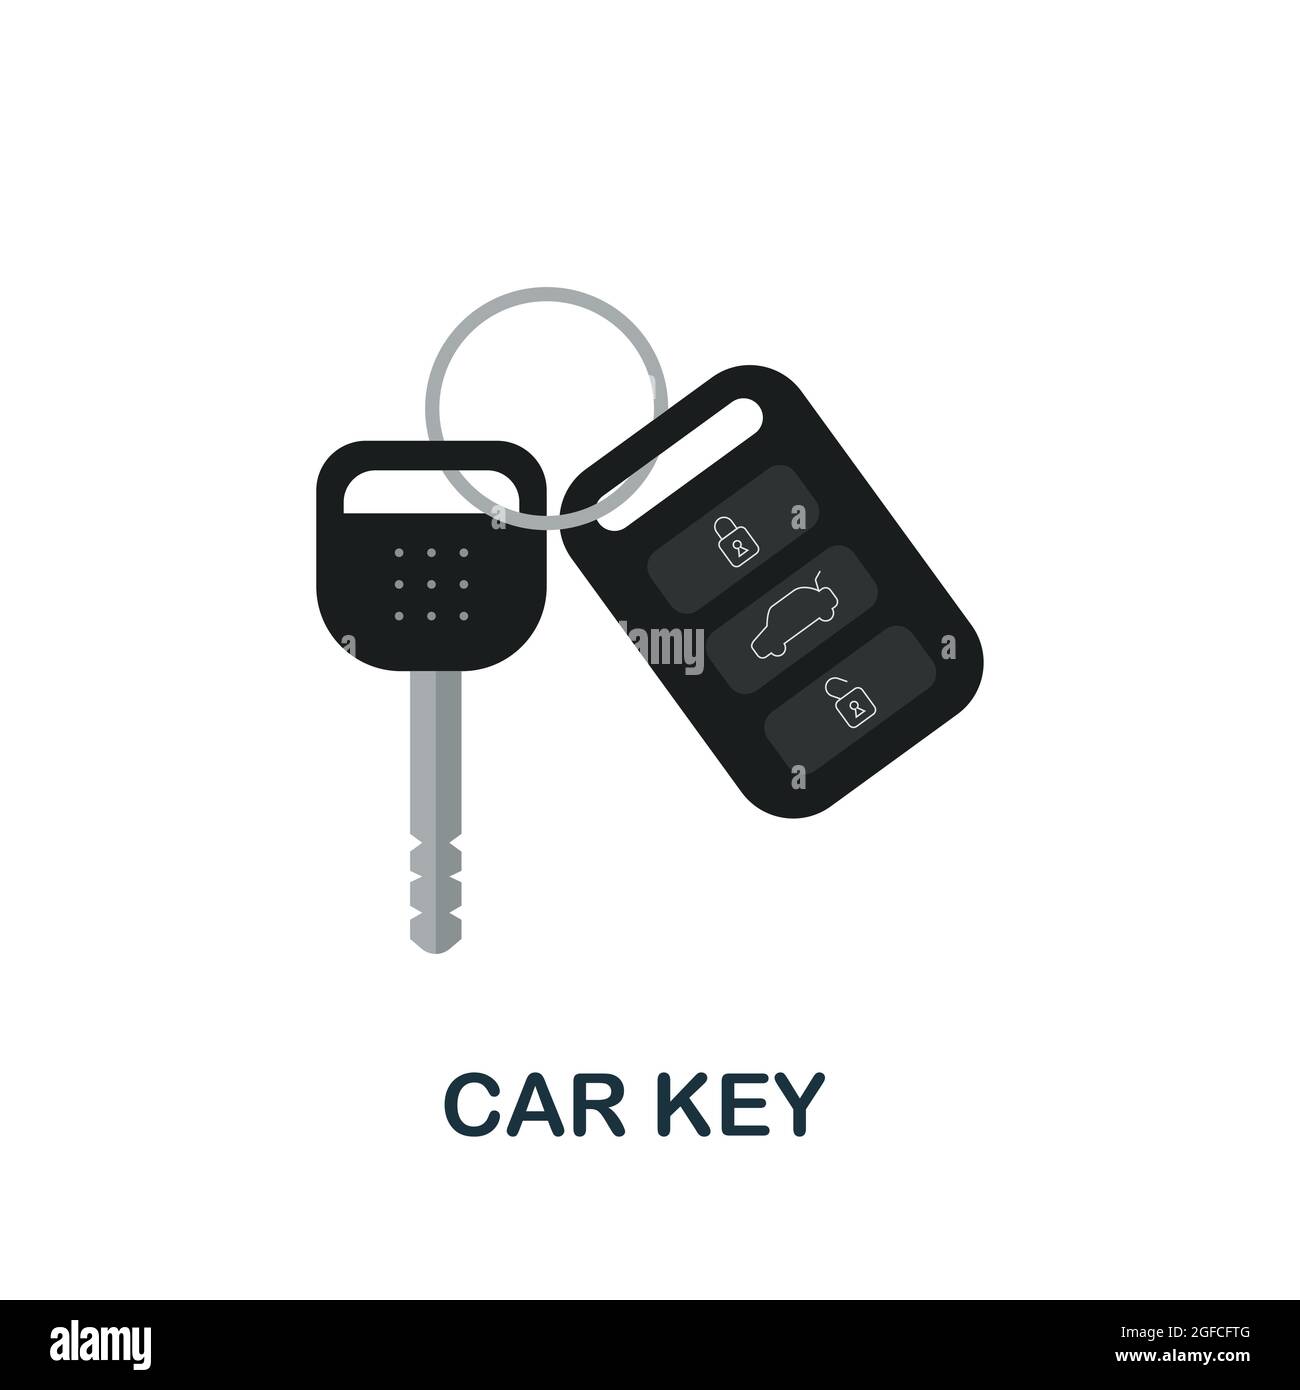 Car Key Remote Stock Vector Illustration and Royalty Free Car Key Remote  Clipart